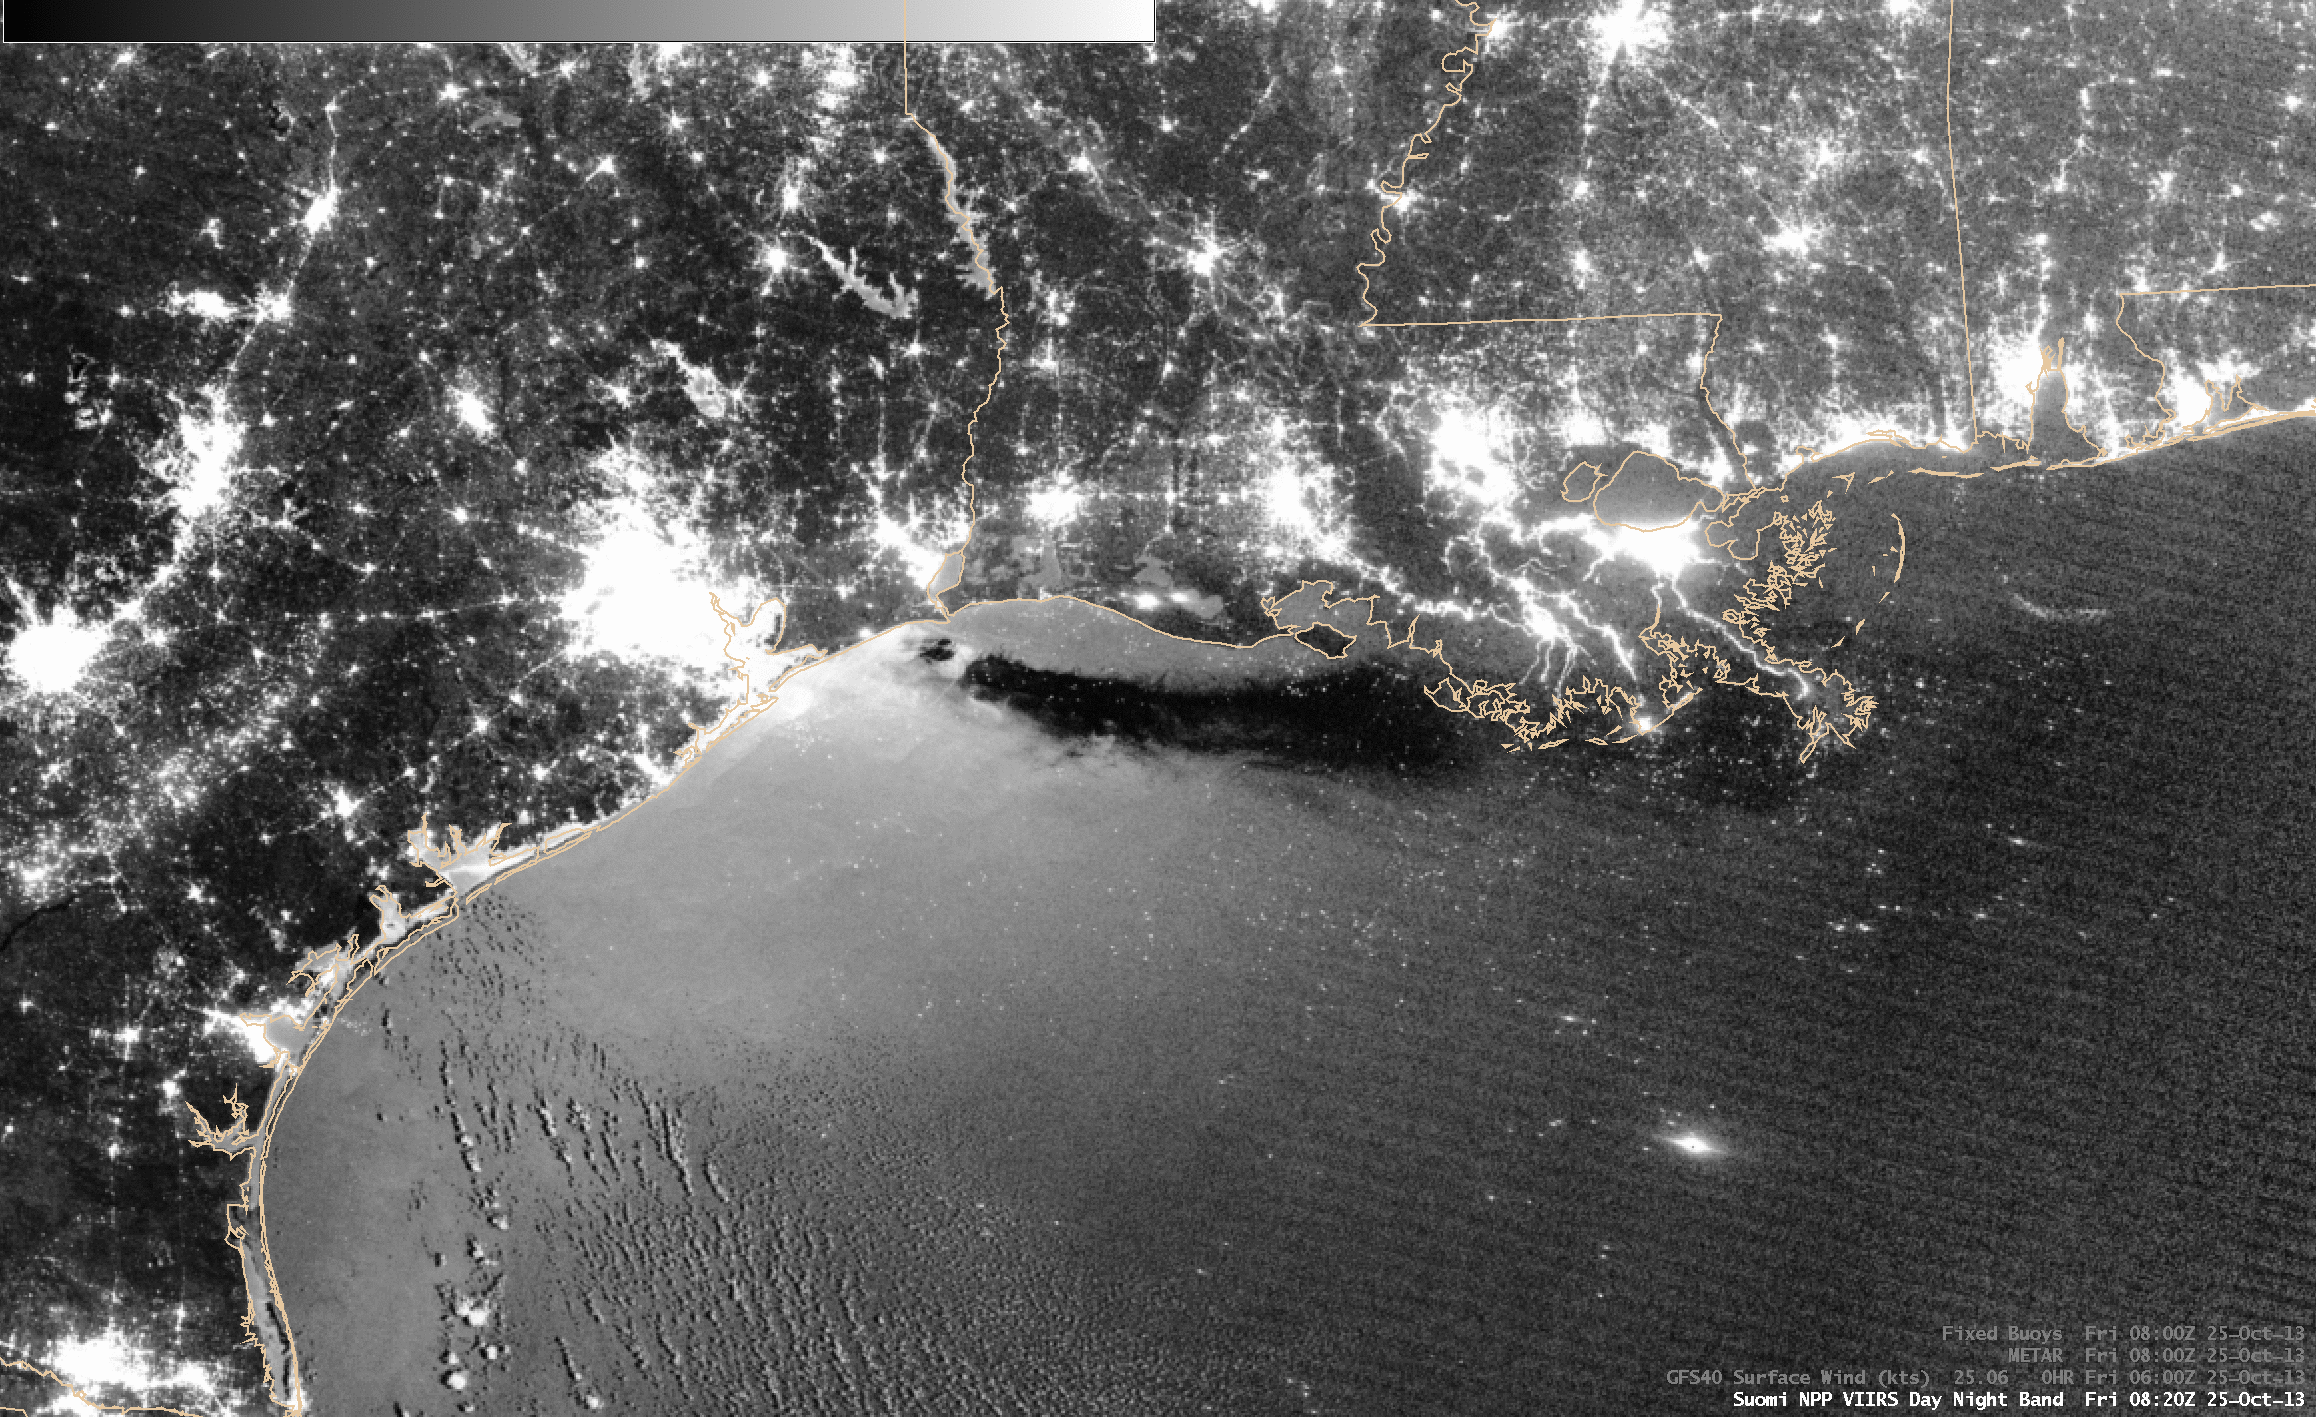 Suomi NPP VIIRS 0.7 Âµm Day/Night Band image, with overlays of GFS surface winds, surface observations, and fronts